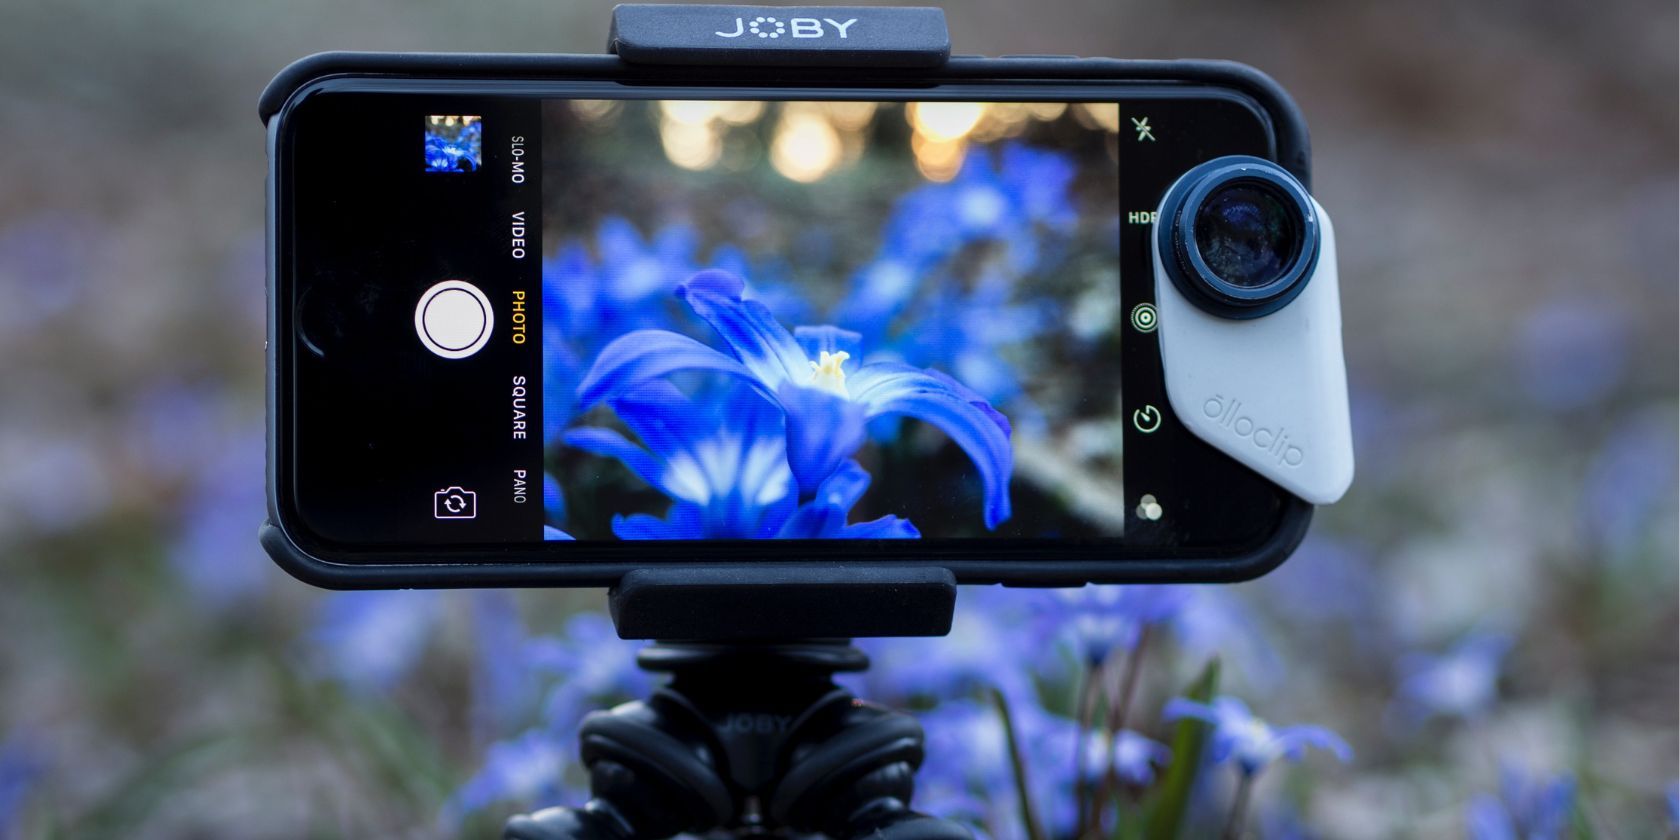 iPhone on a tripod stand taking a close-up picture of a blue flower 